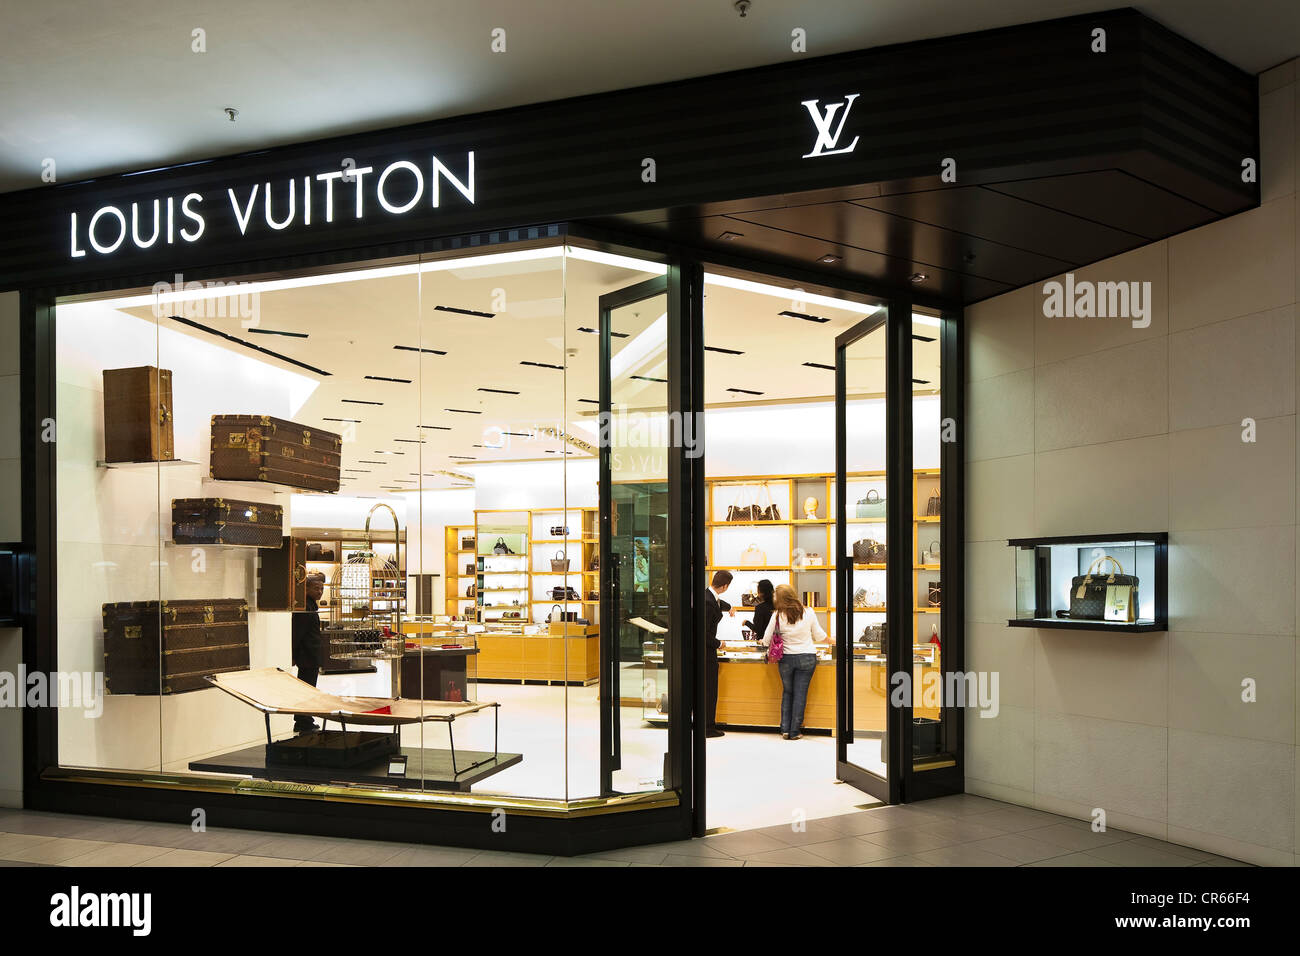 Louis Vuitton opens new store in Johannesburg at Sandton City Mall